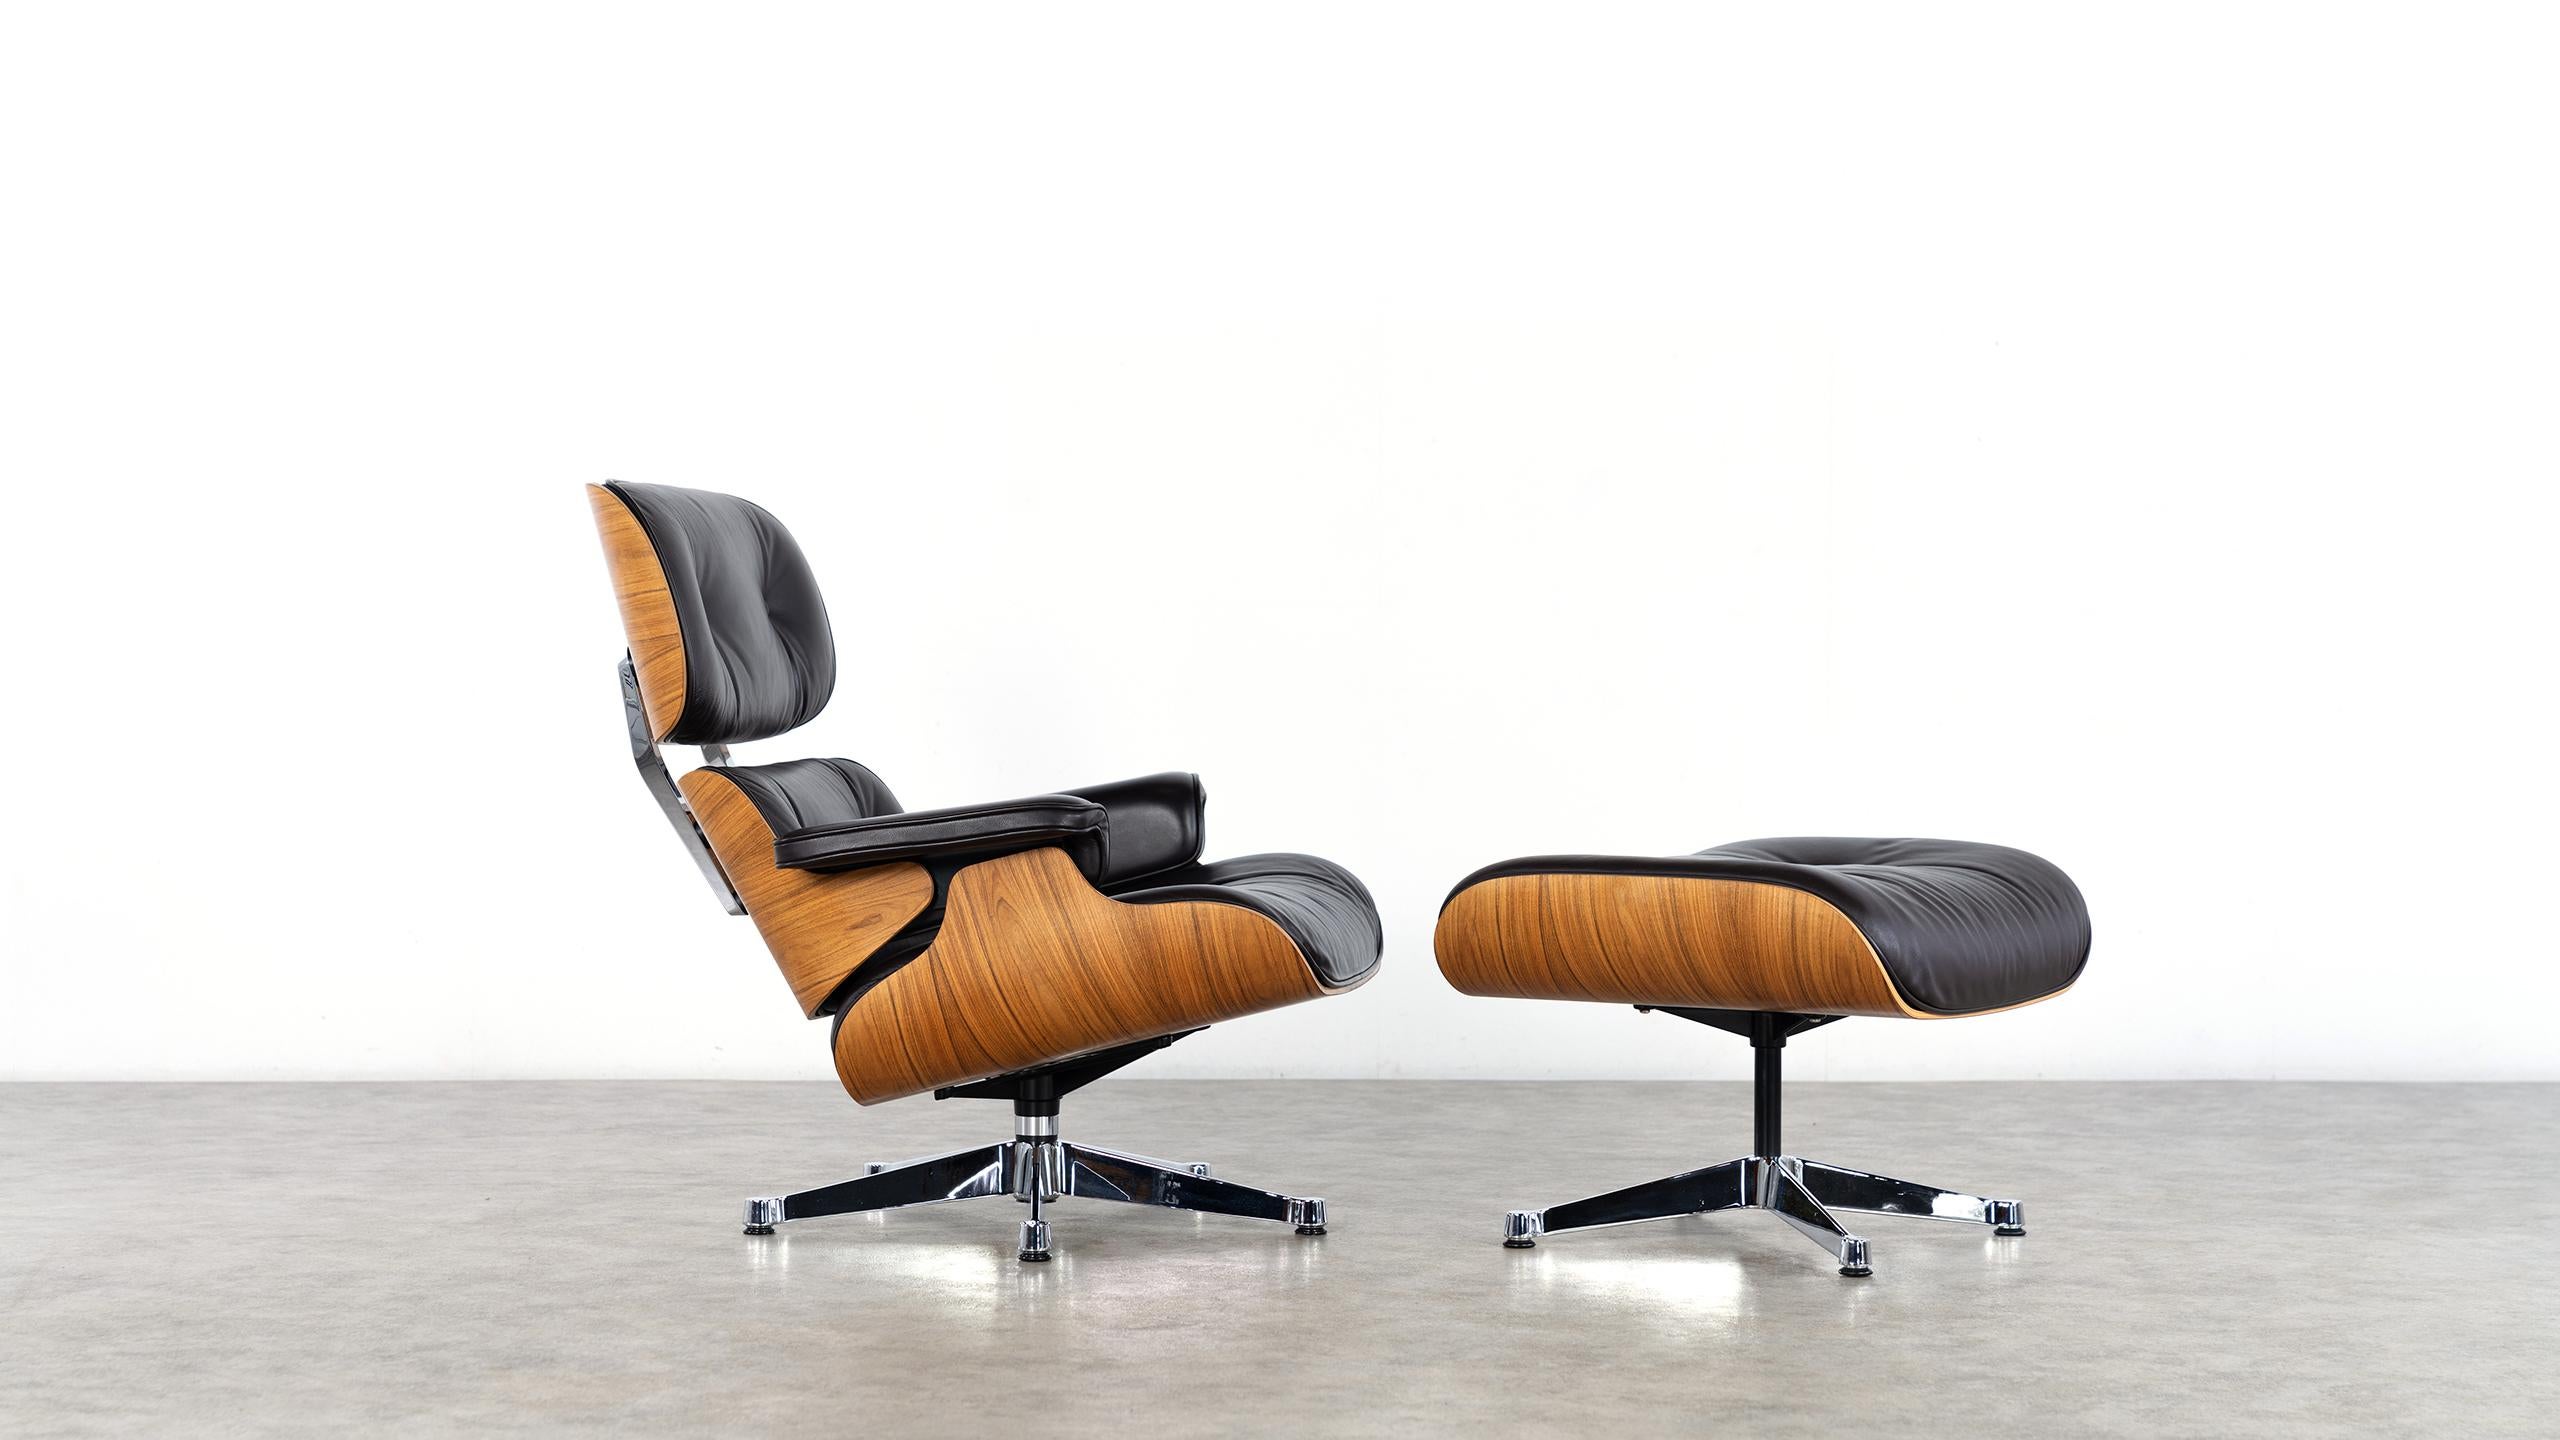 Charles & Ray Eames - Lounge Chair & Ottoman 2006 by Vitra, certified Rosewood

Designed in 1956, this piece was made by Vitra in 2006.
Original invoice, Cites Certificate etc. available.

Shells in finest grained Santos rosewood, in combination